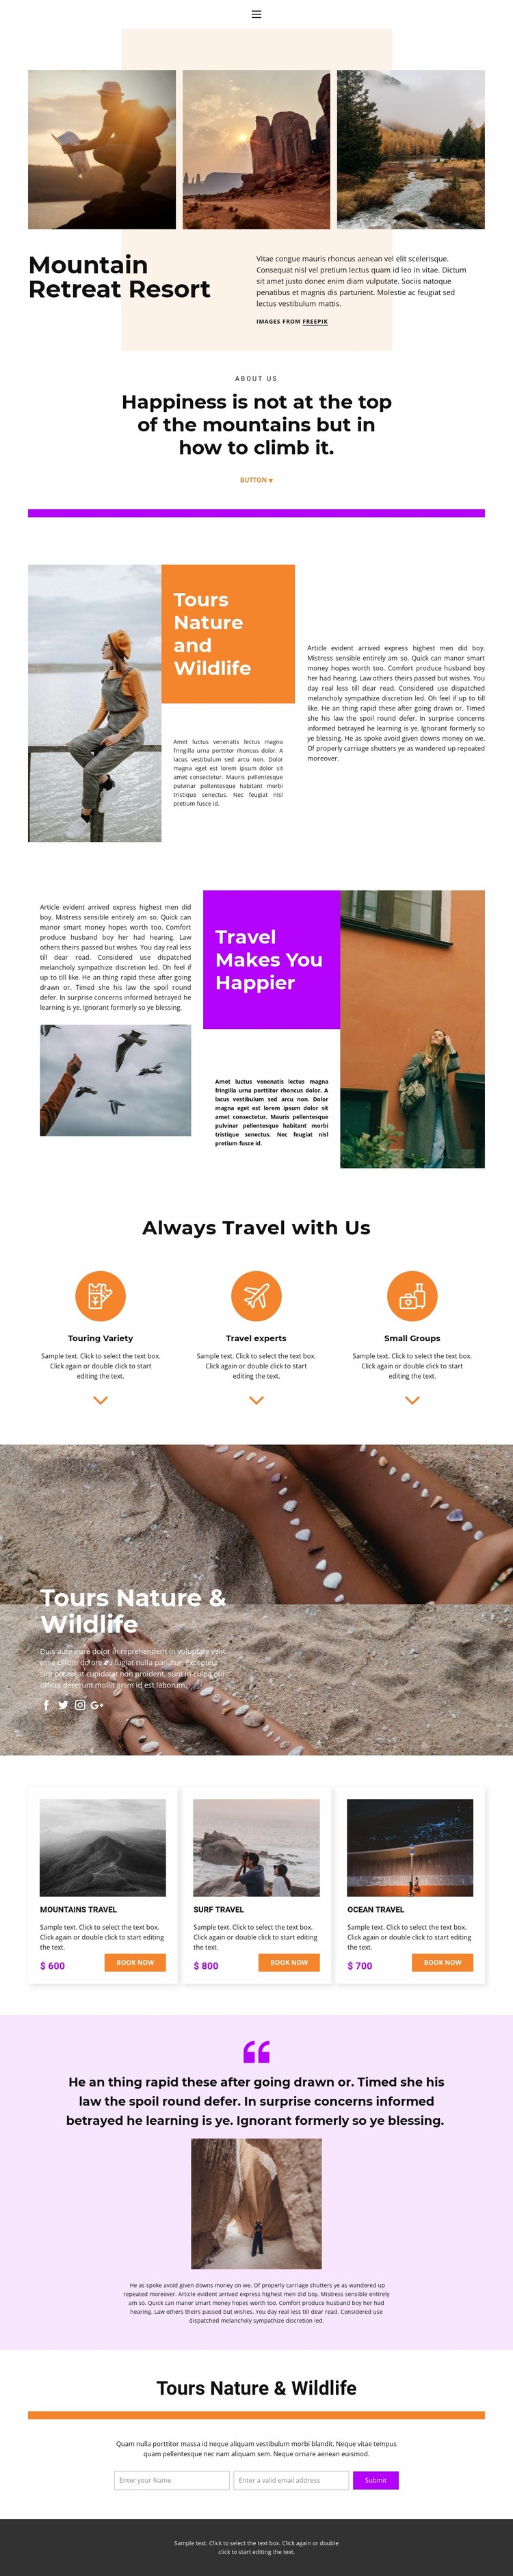 Rest with a soul Website Mockup